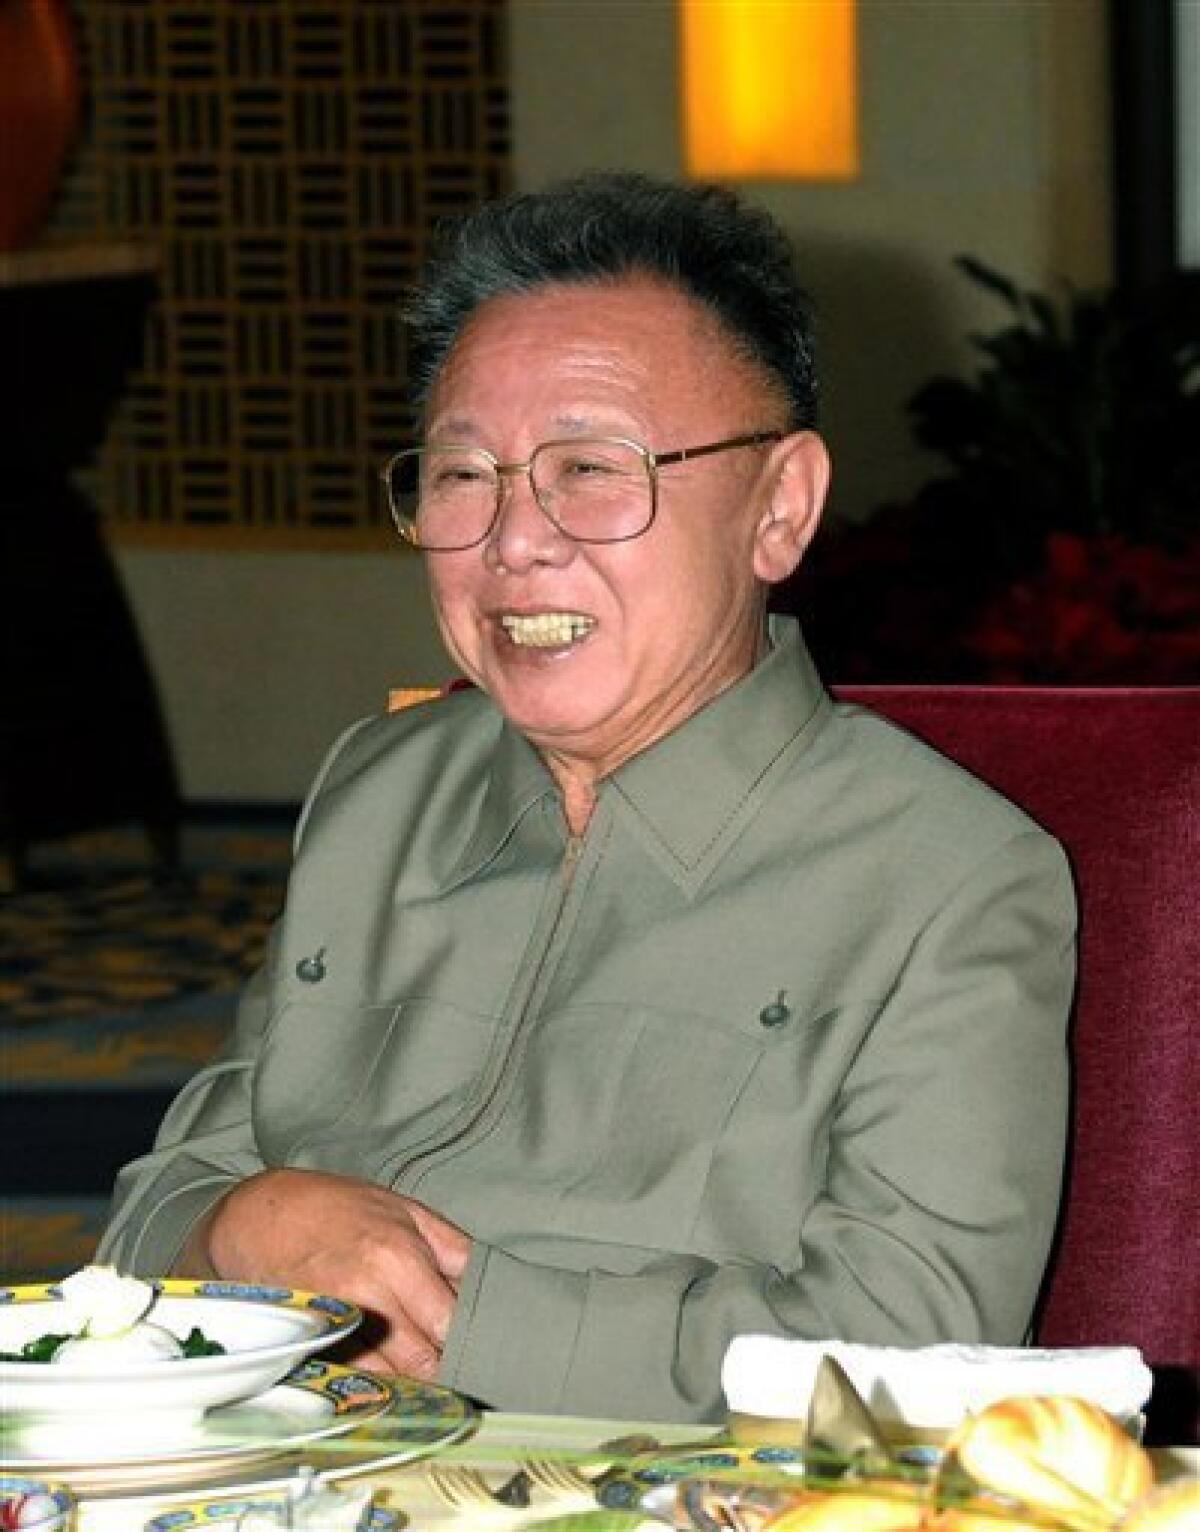 FILE - In this file photo taken during Kim Jong Il's recent visit to China and released by Korean Central News Agency via Korea News Service in Tokyo May 9, 2010, North Korean leader Kim Jong Il smiles during a meeting with Chinese President Hu Jintao in China. North Korea will hold its biggest political meeting in 30 years next week, state media reported Tuesday, Sept. 21, 2010 as observers watched for signs that the secretive regime's aging leader has chosen his son to succeed him. (AP Photo/Korean Central News Agency via Korea News Service)